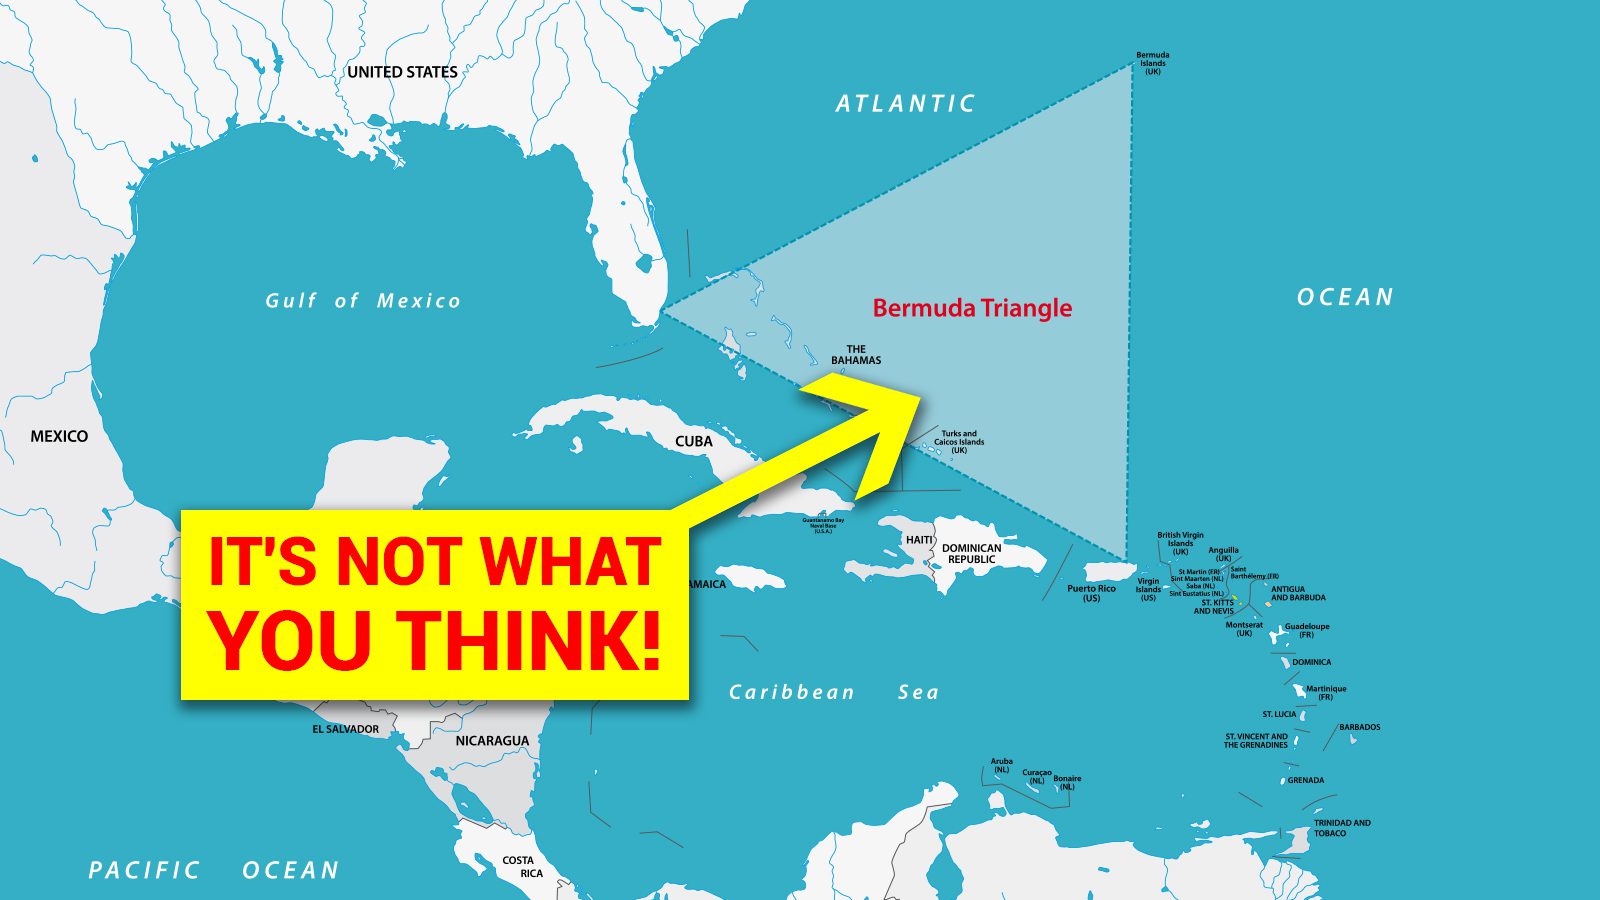 Science Explains the Mystery of the Bermuda Triangle (It’s Not What You Think)